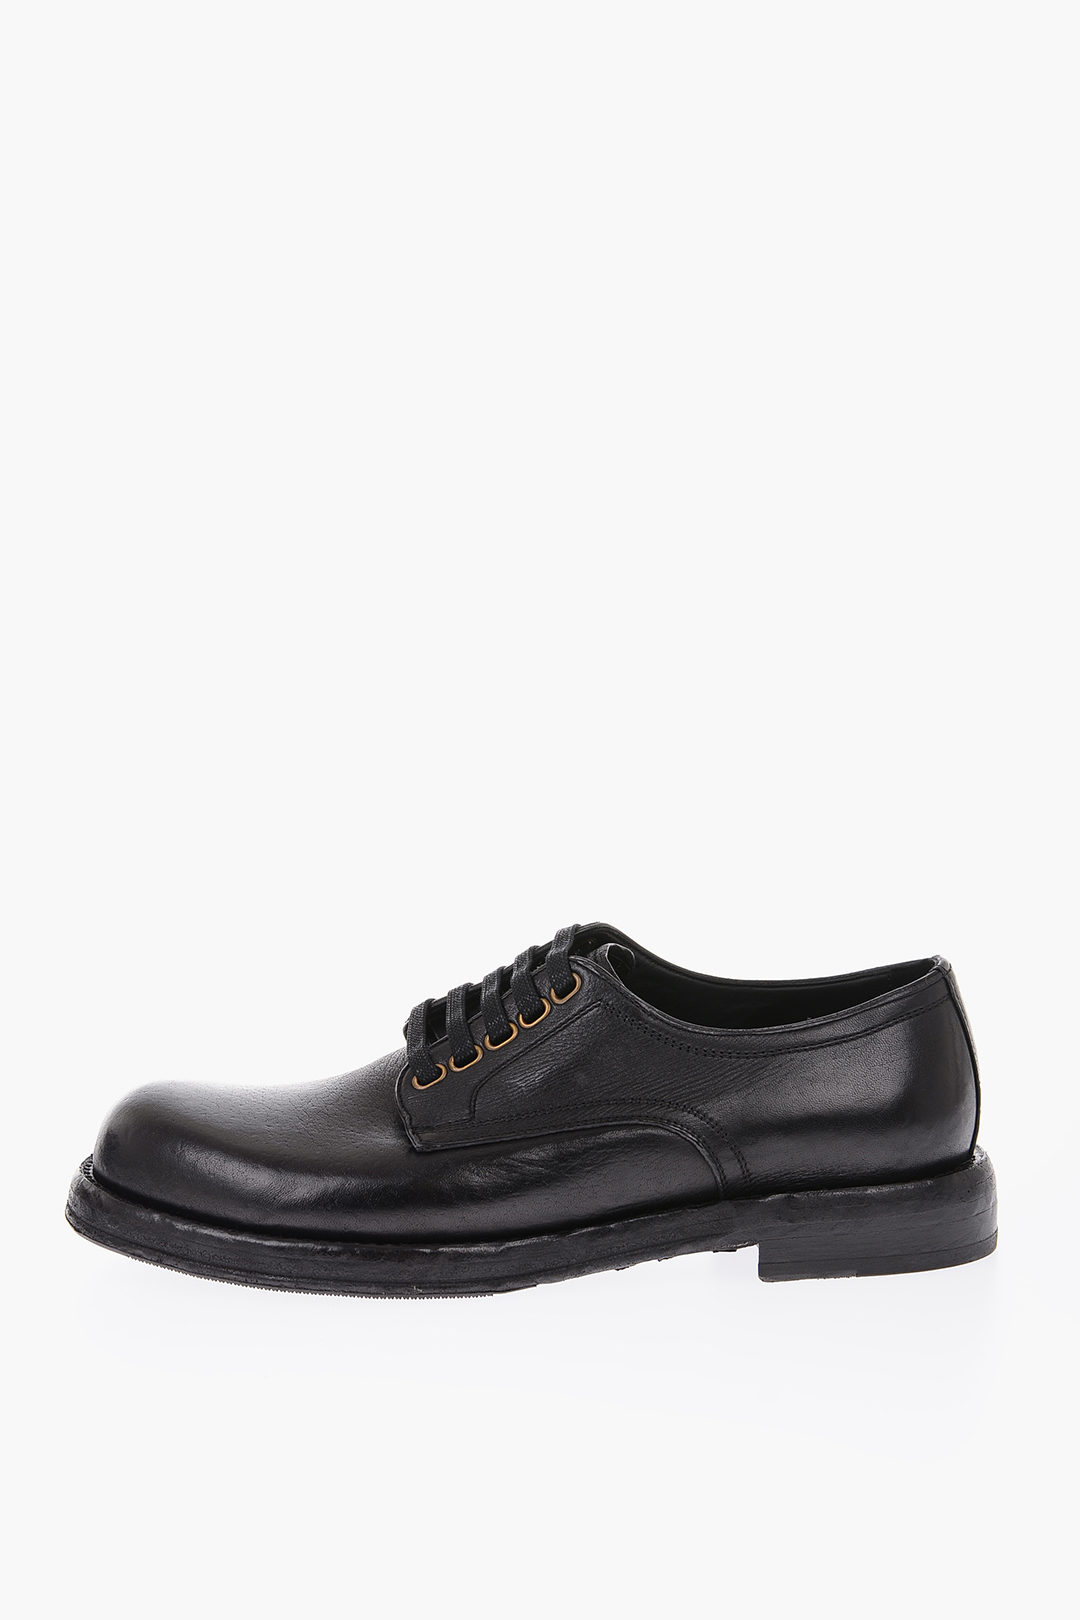 Dolce & Gabbana leather PERUGINO Derby shoes men - Glamood Outlet